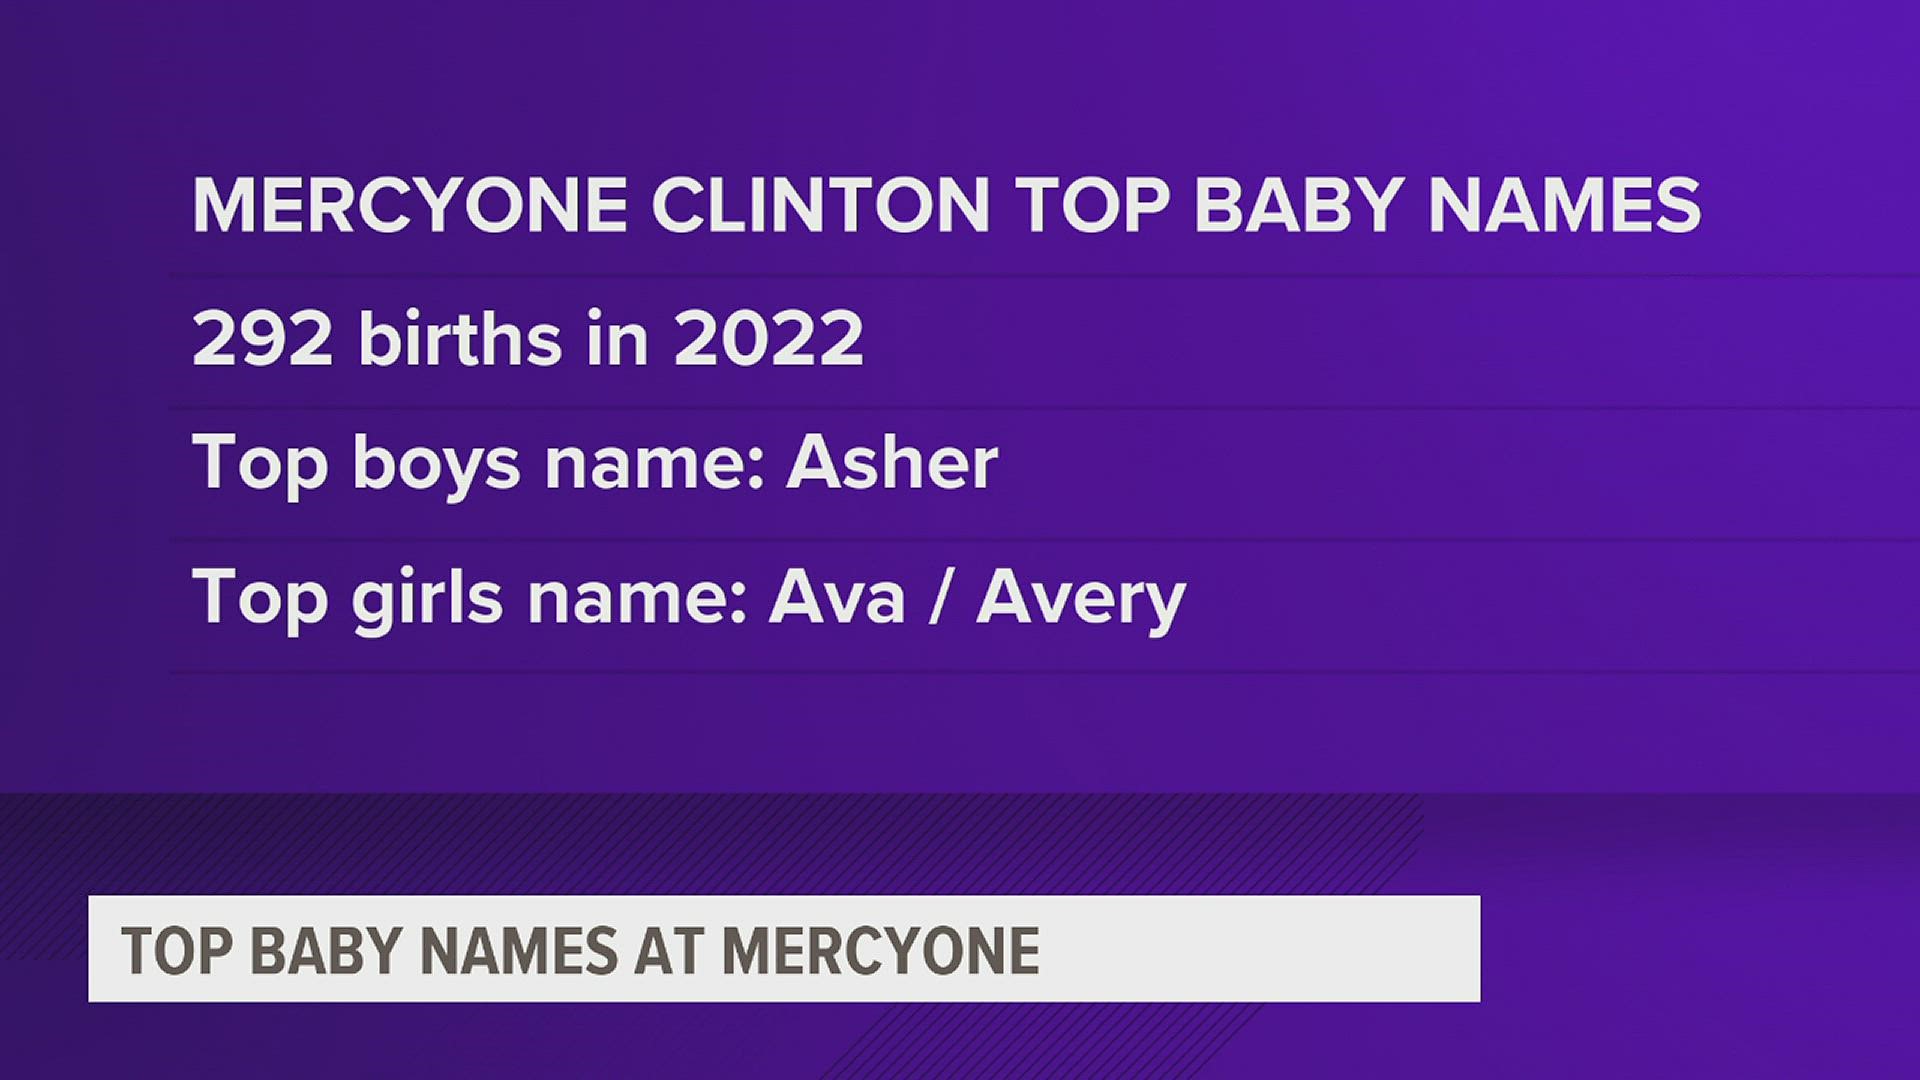 MercyOne says more than 6,600 births occurred across its Iowa hospitals this year, including 115 sets of twins and three sets of triplets.